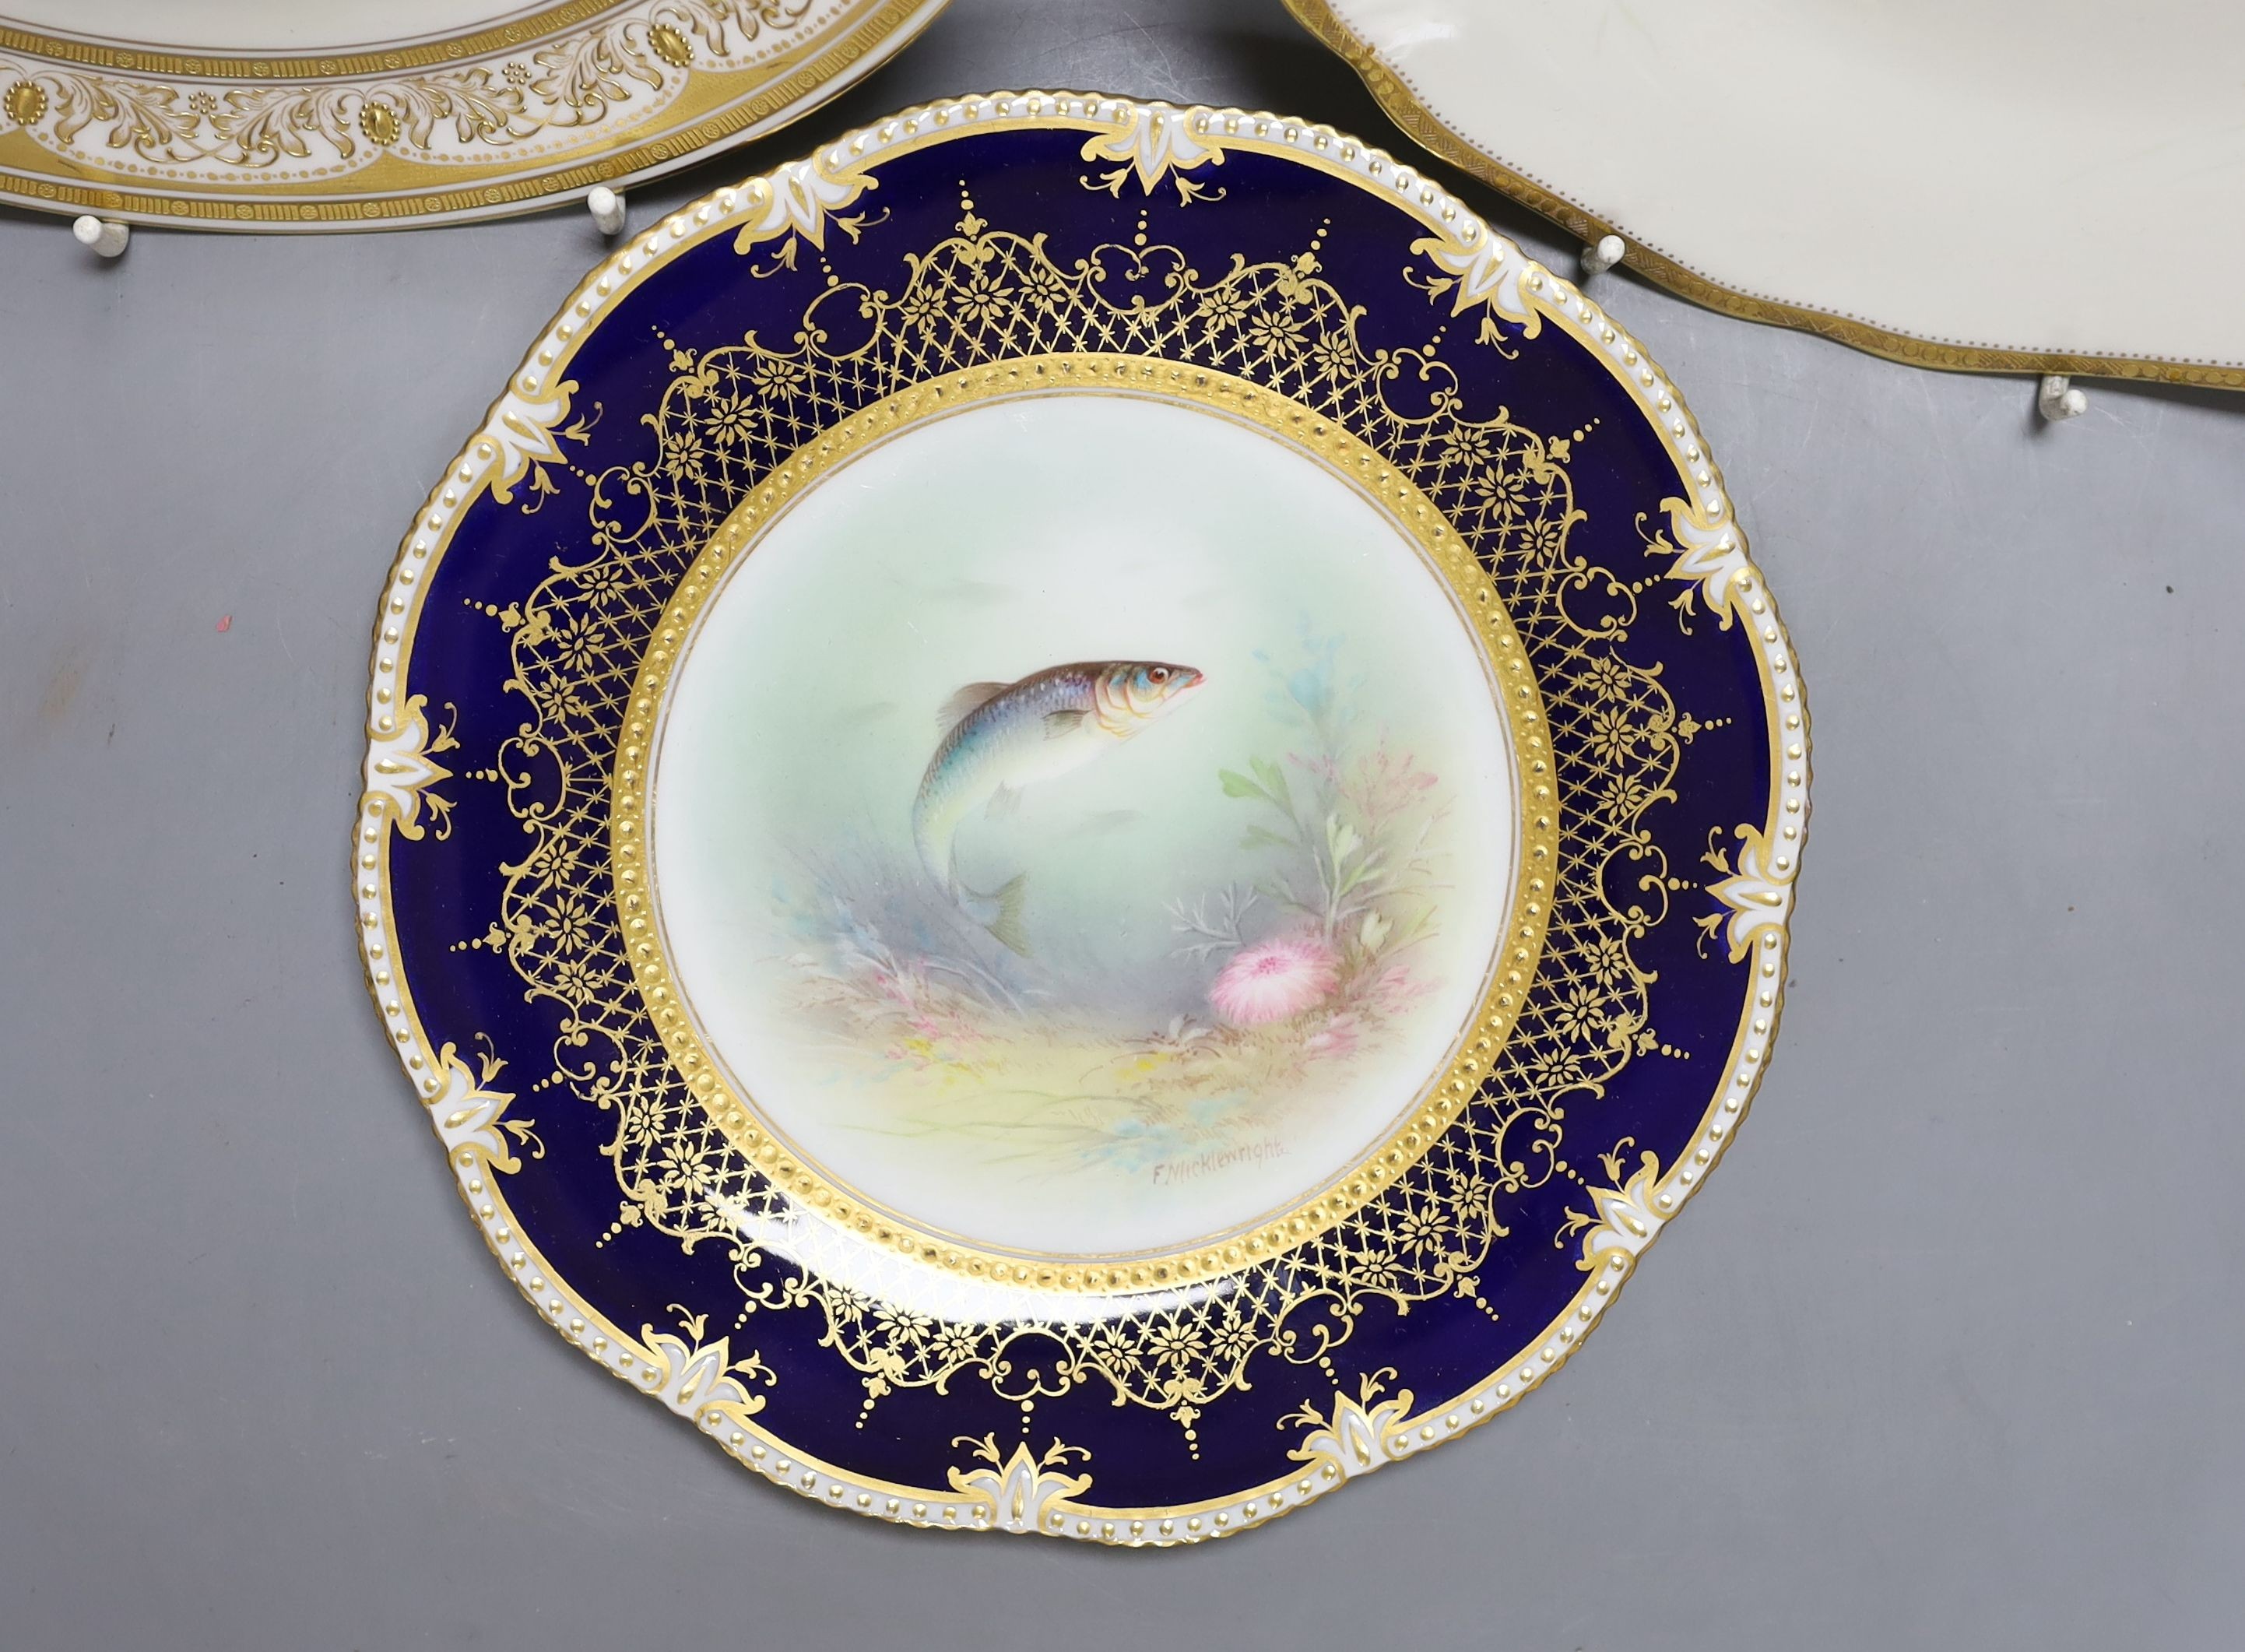 An Aynsley fish painted plate by S Micklewright, A Royal Doulton mallard or wild duck painted cabinet plate by J. Hancock and a Cauldon duck painted plate by D. Birkbeck (3)